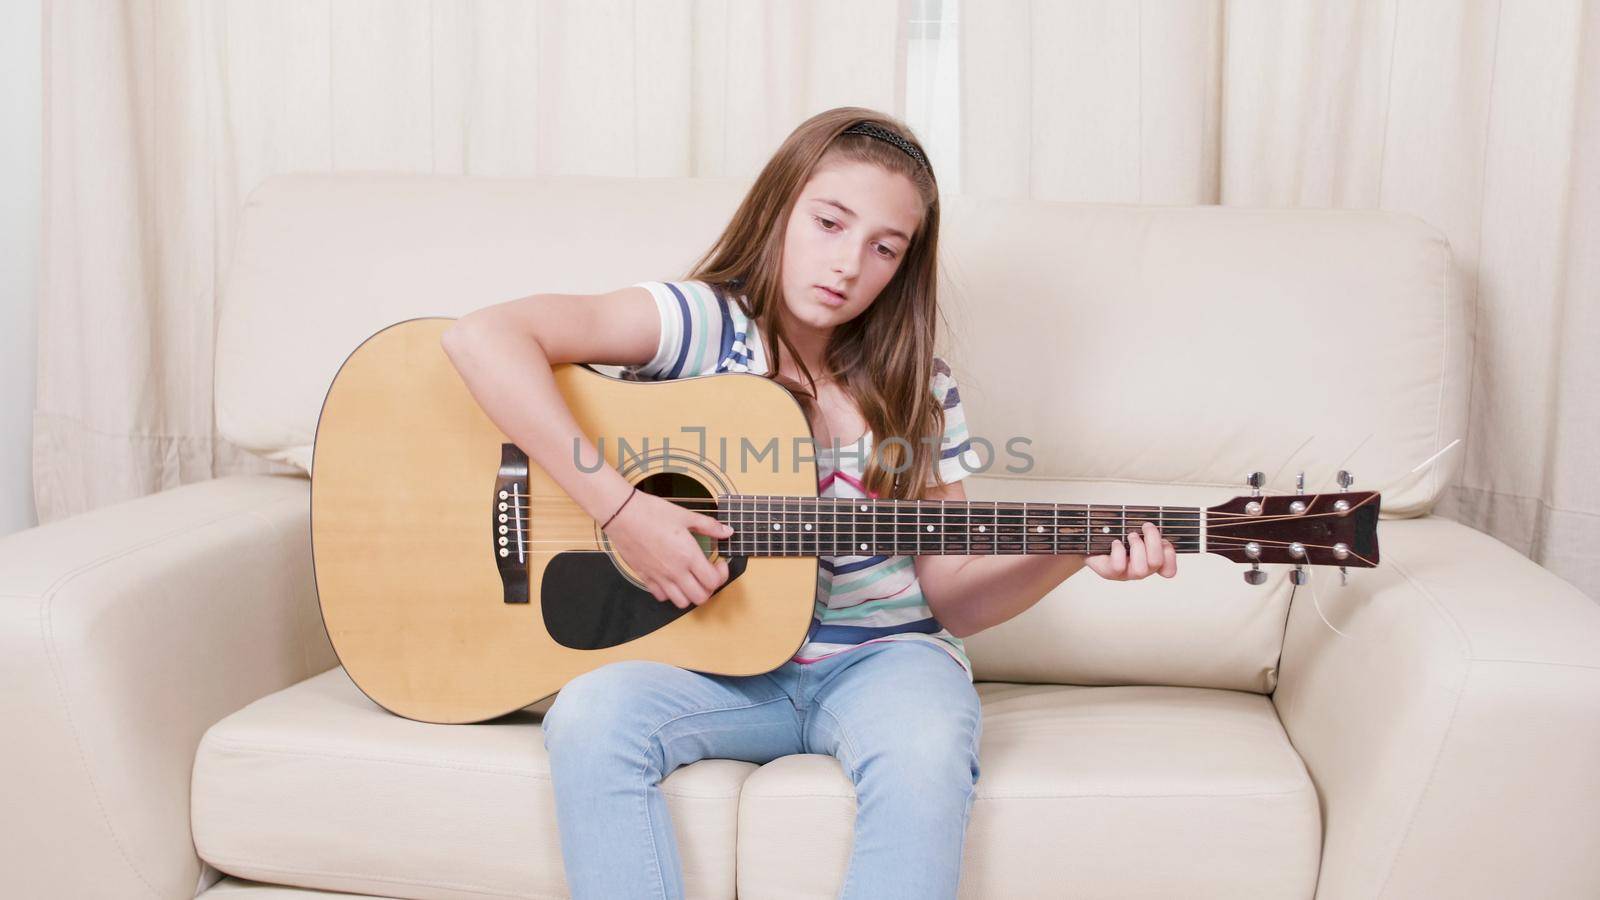 Young guitarist child sitting on sofa holding guitar learning how to sing for musical school lesson enjoying playing instrument. Creative kid studying musical lessons. Concept of educational activity